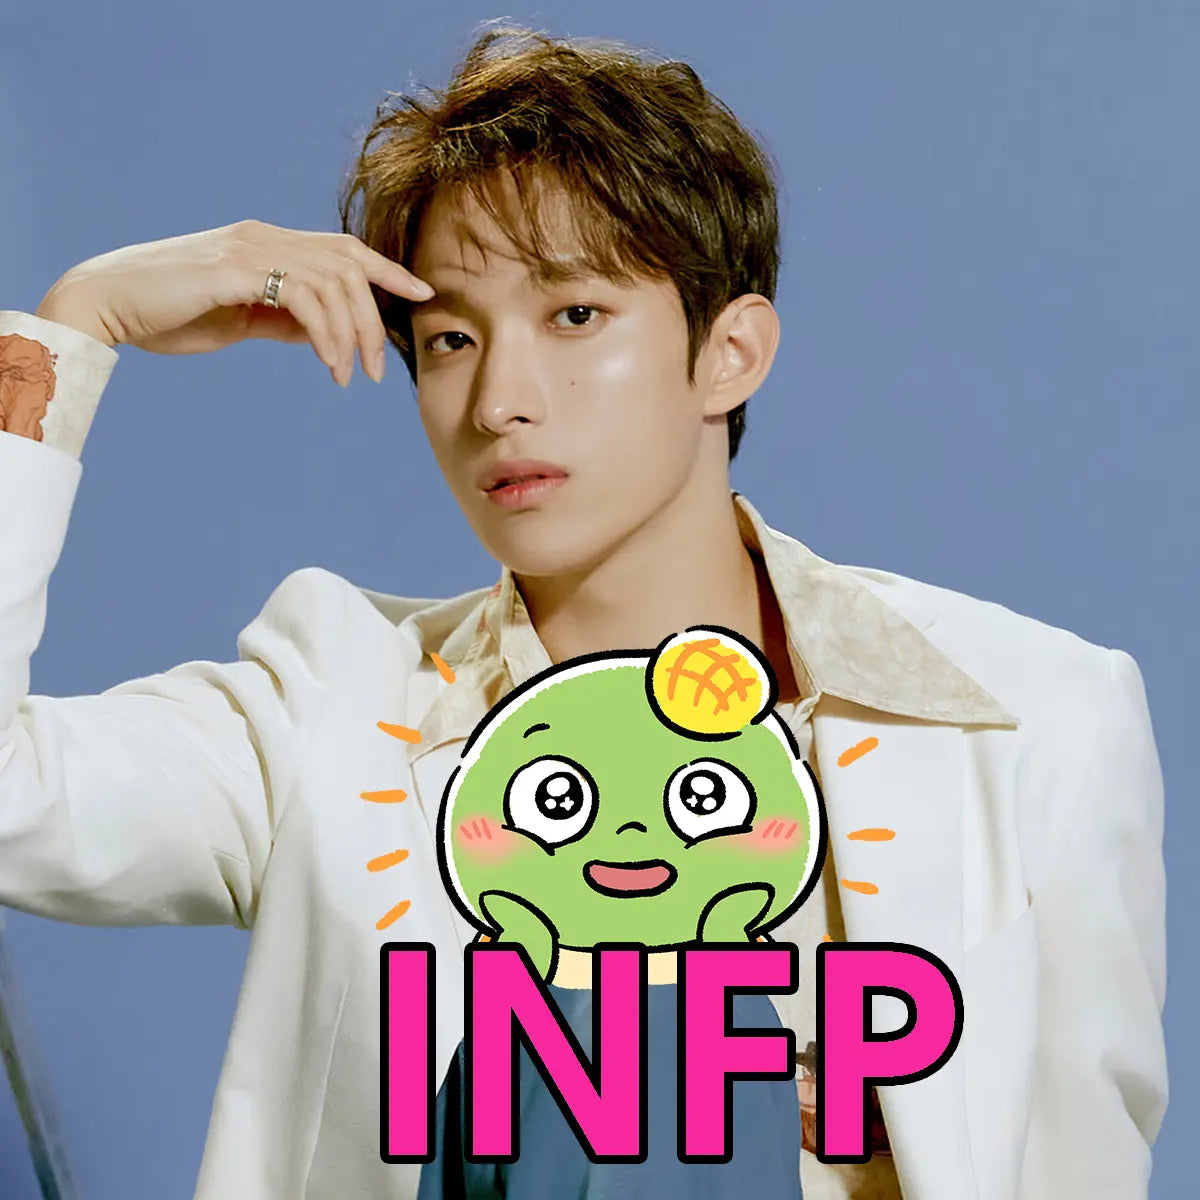 DK SEVENTEEN MBTI Personality Test INFP Personality Type